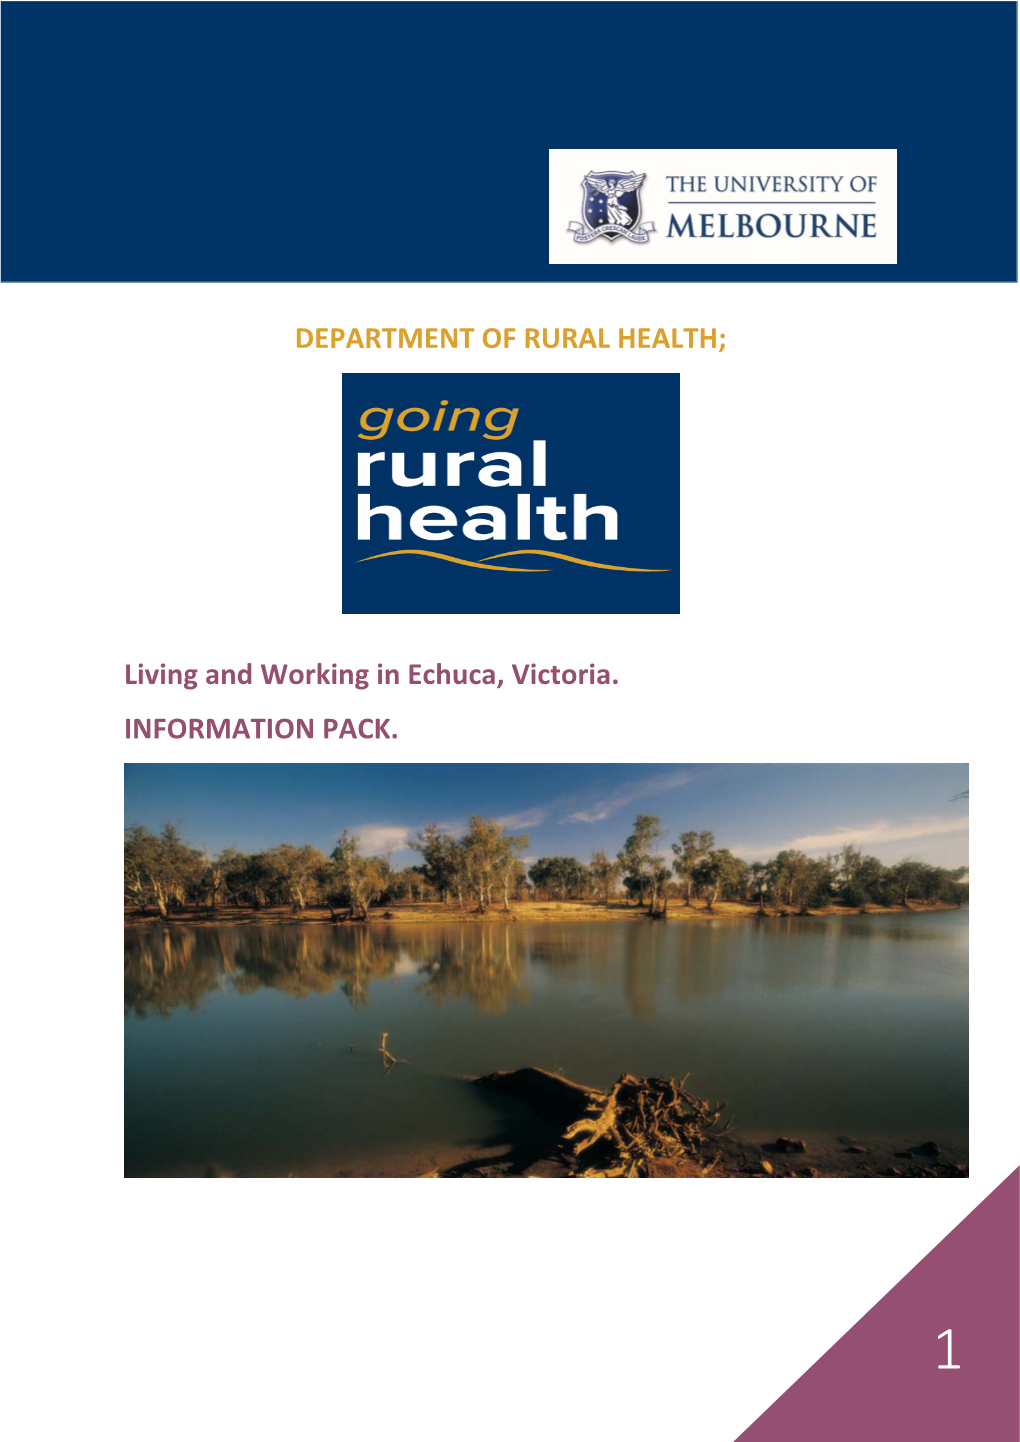 Living and Working in Echuca, Victoria